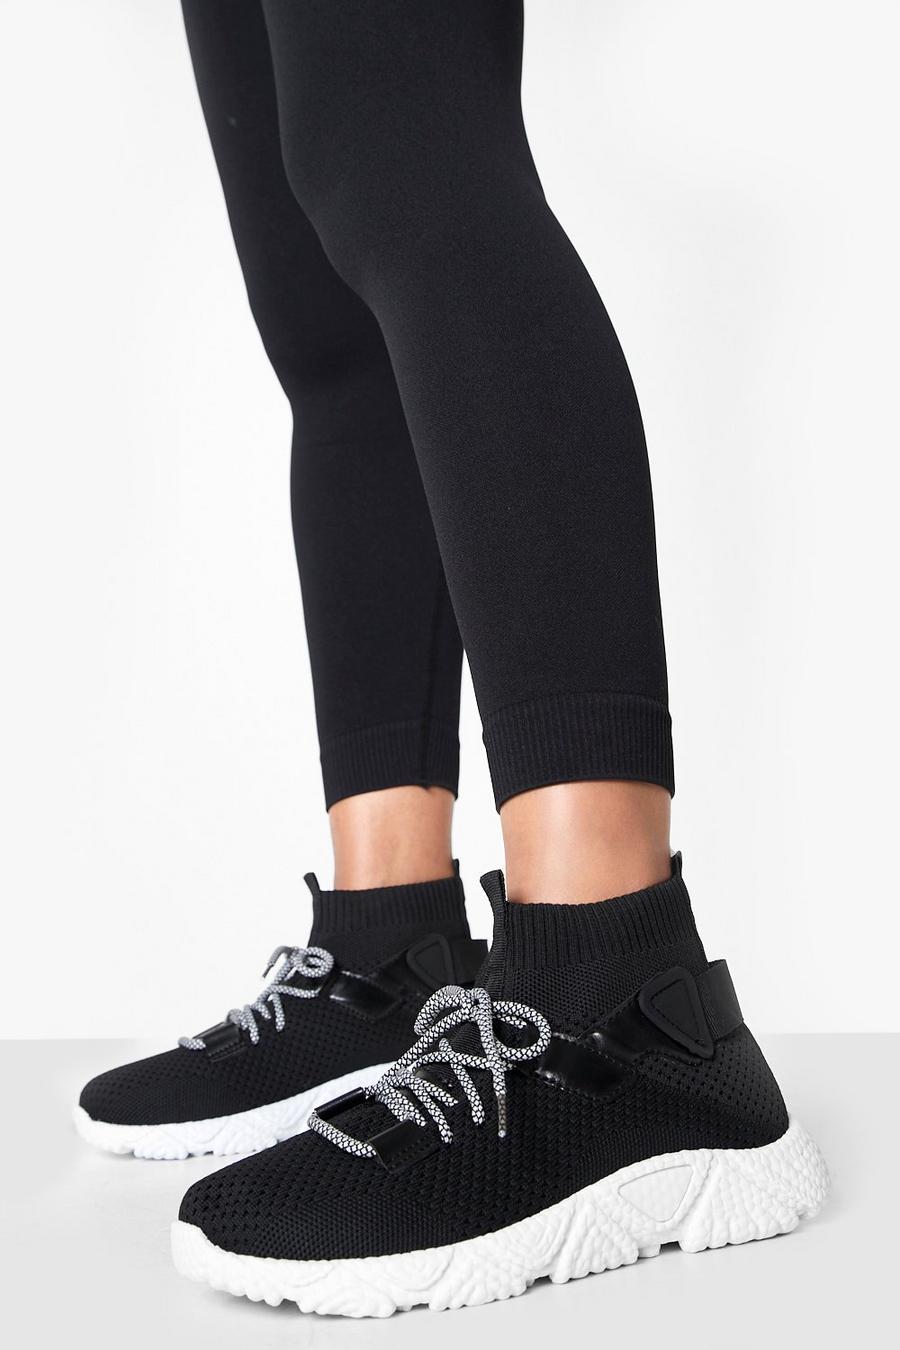 Black Lace Up Sock Trainers